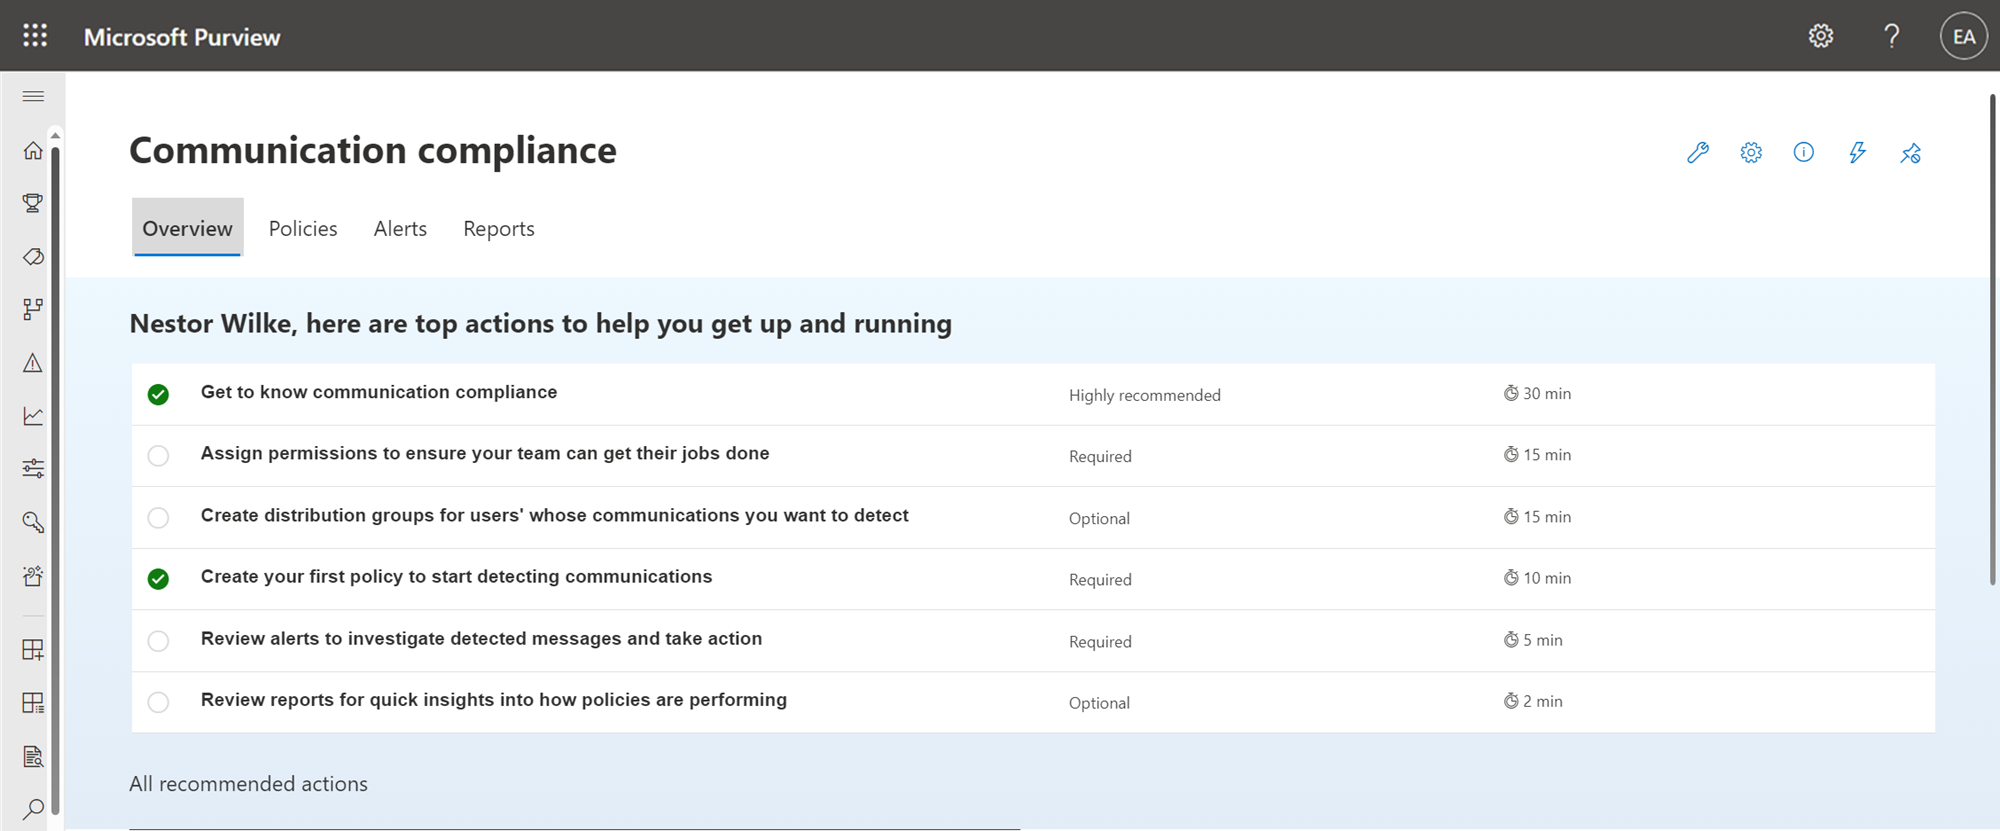 Coming soon to public preview, the Communication Compliance solution in the Microsoft Purview compliance portal will surface step-by-step guidance to help admins get started with policy configuration and common Communication Compliance tasks.